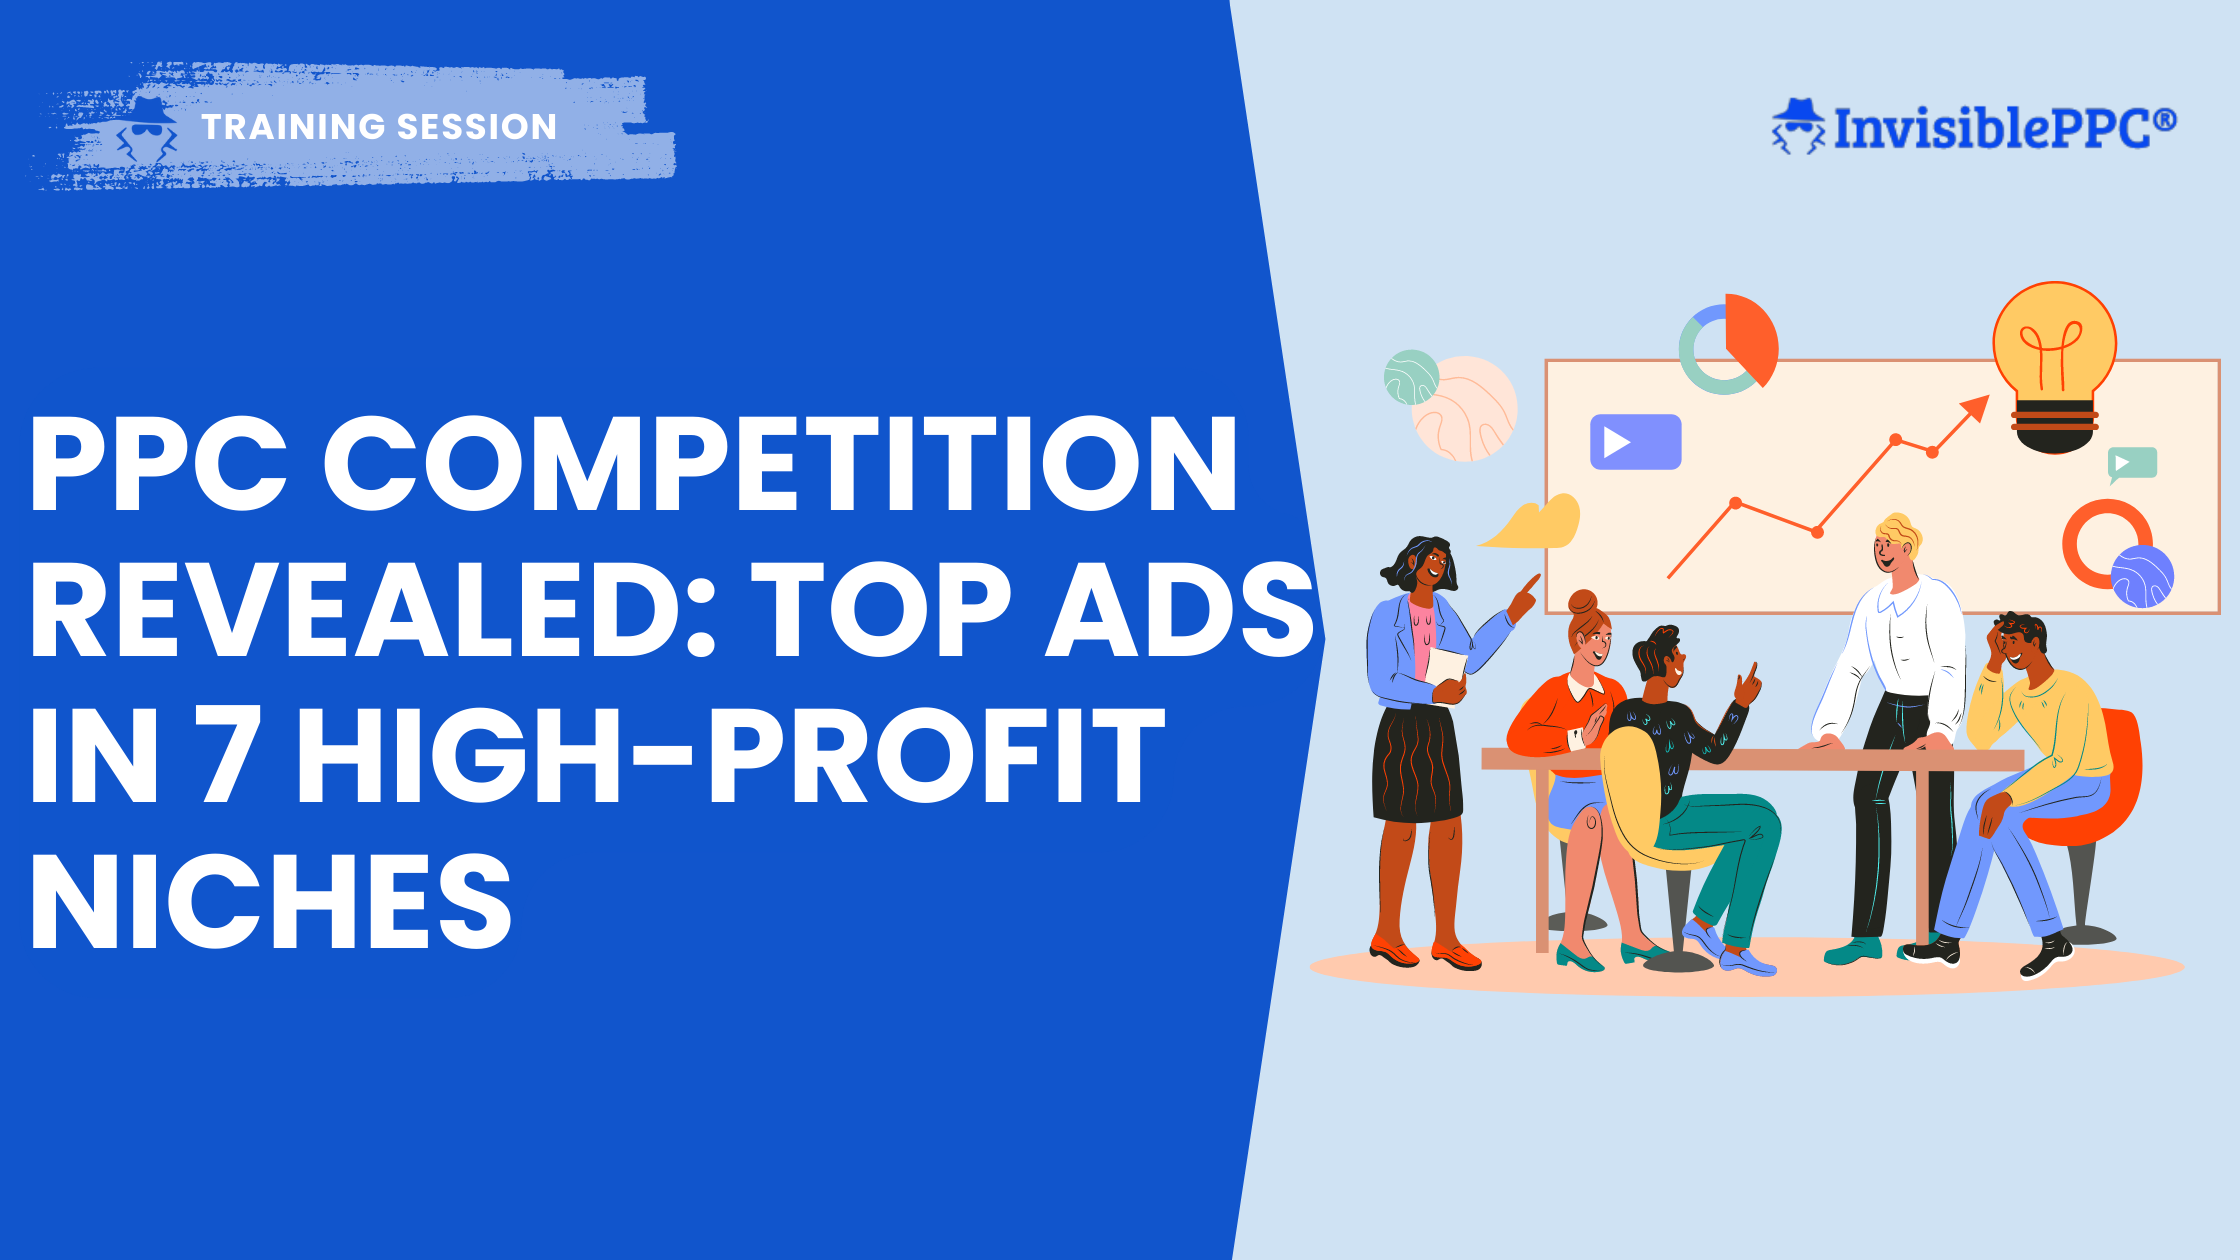 PPC Competition Revealed: Top Ads in 7 High-Profit Niches